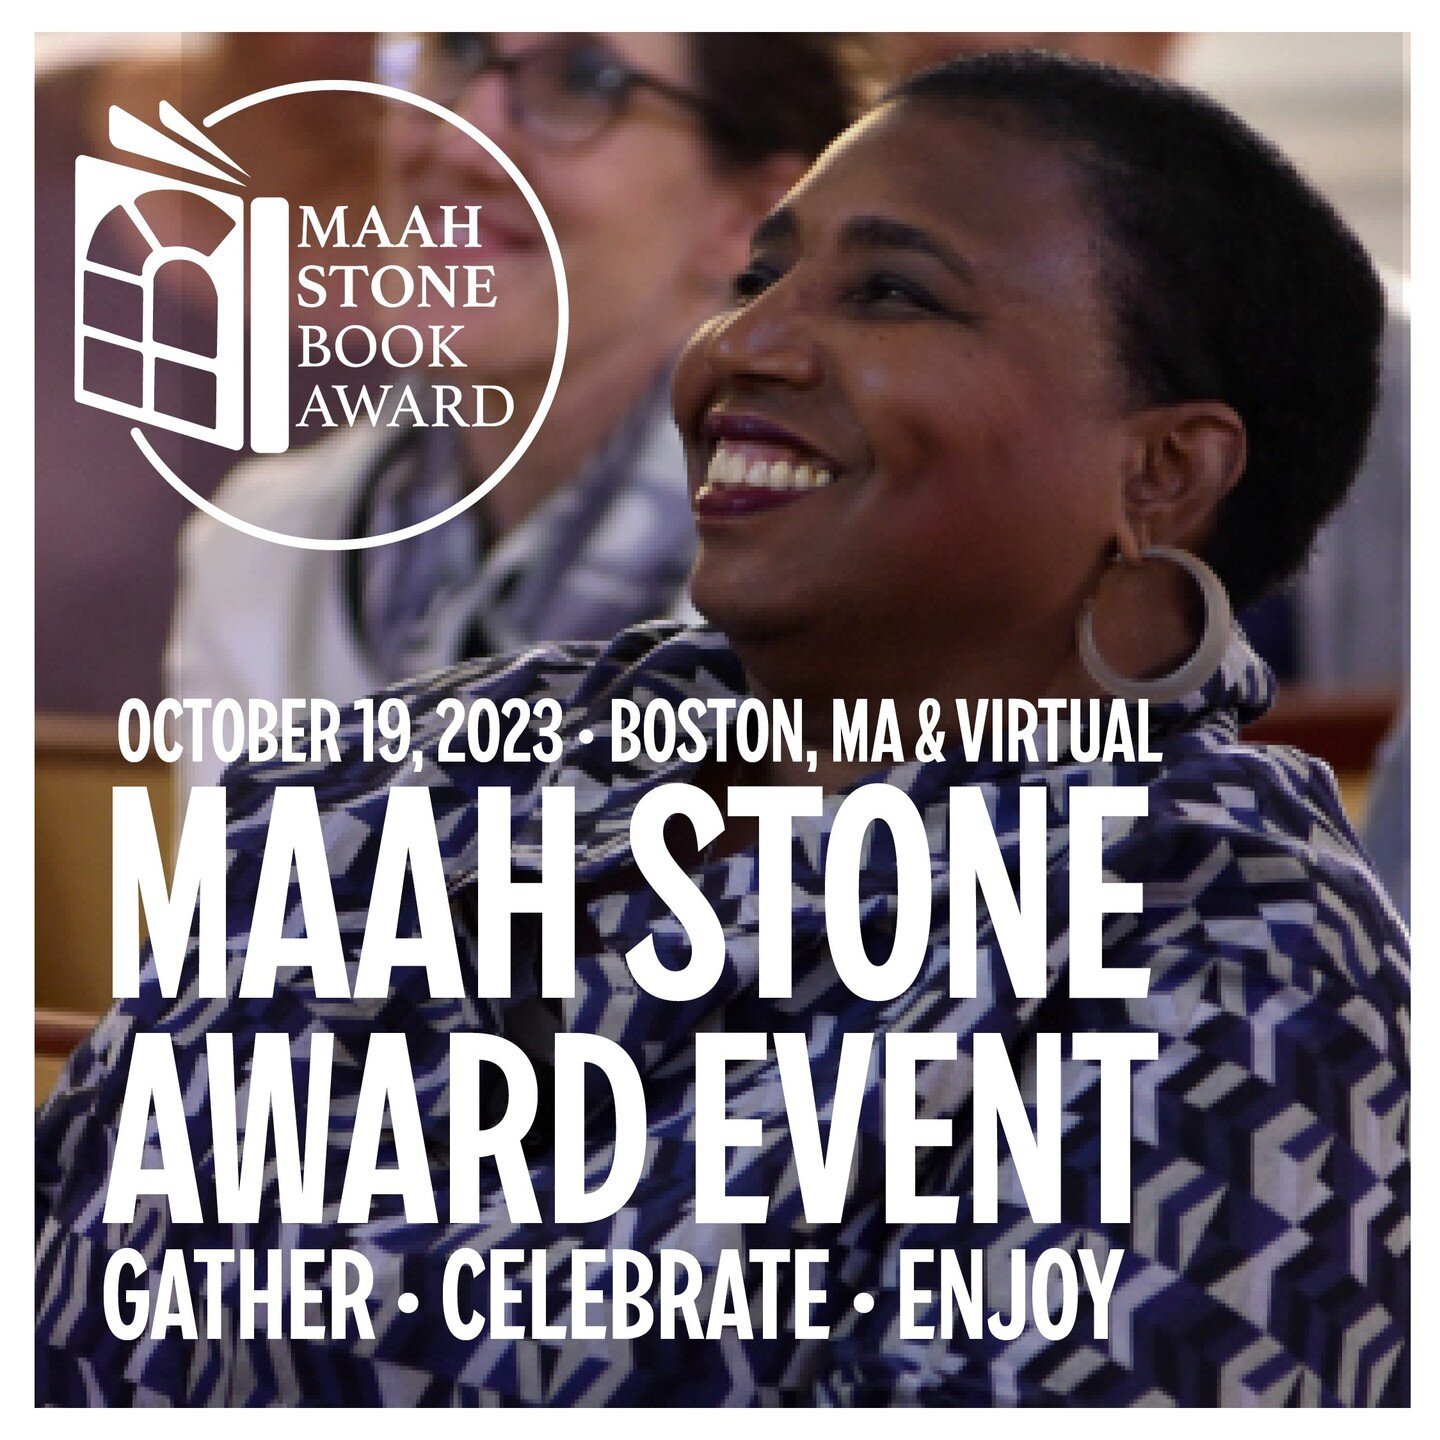 ENJOYment! Register today (link in bio) for the 2023 MAAH Stone Book Award Event - back IN-PERSON at the African Meeting House! Free signed books to the first 100 through the door. Reception @ 5:30pm/Awards presentation live-streamed at 6:30pm (ET). 